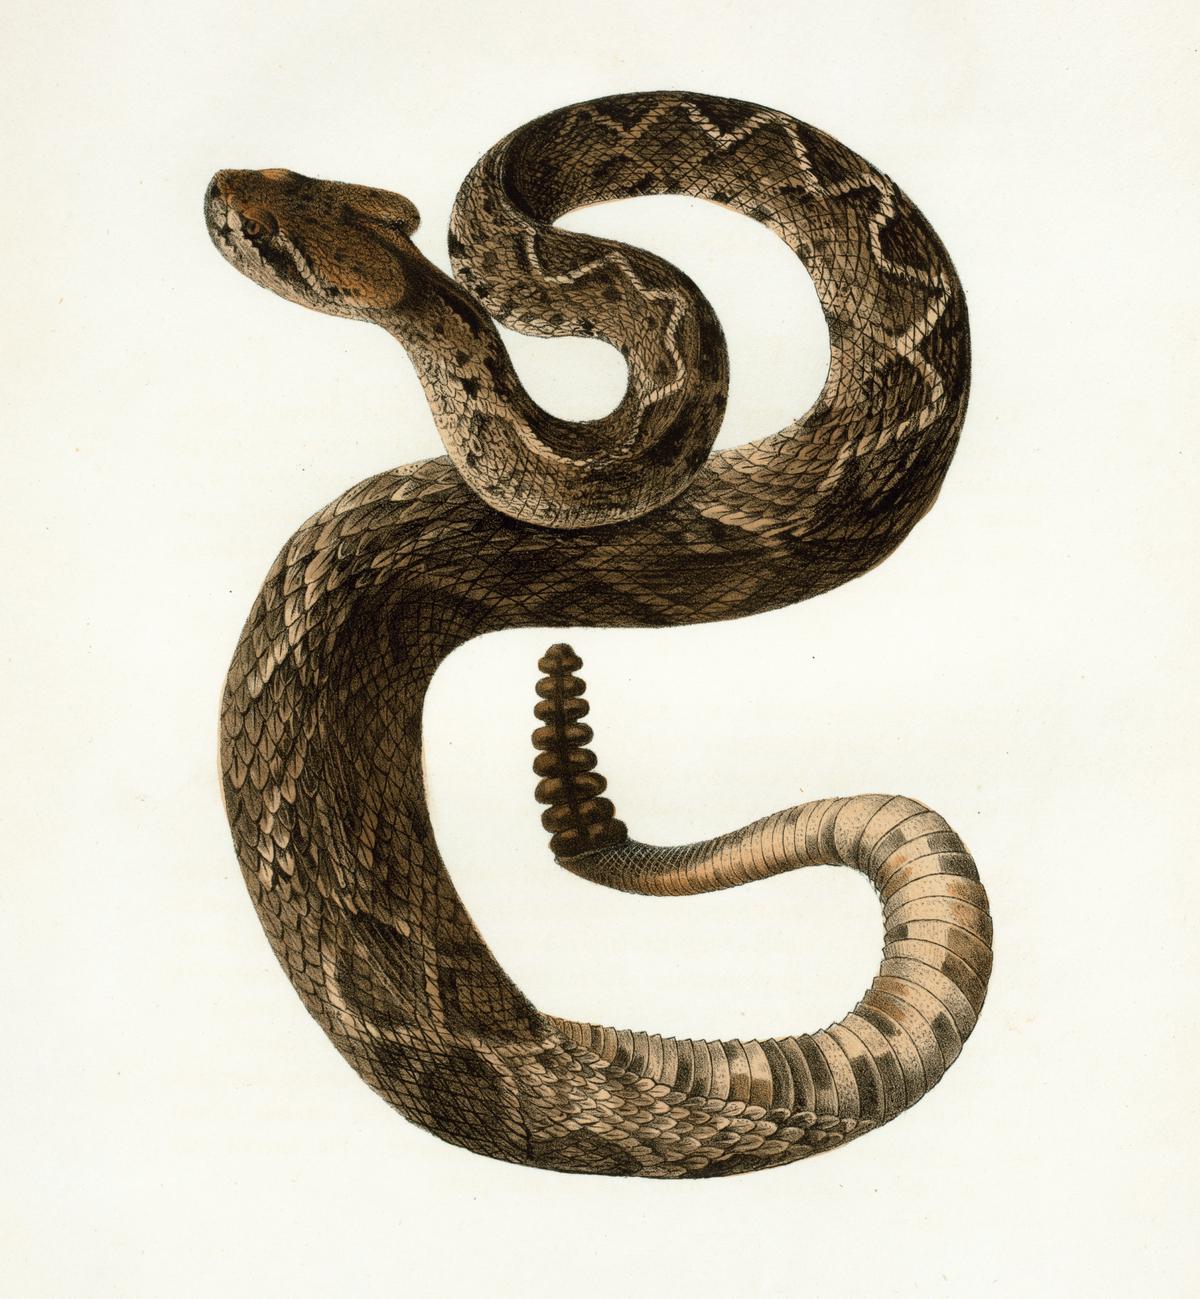 Illustration of a biblical snake, representing both temptation and salvation